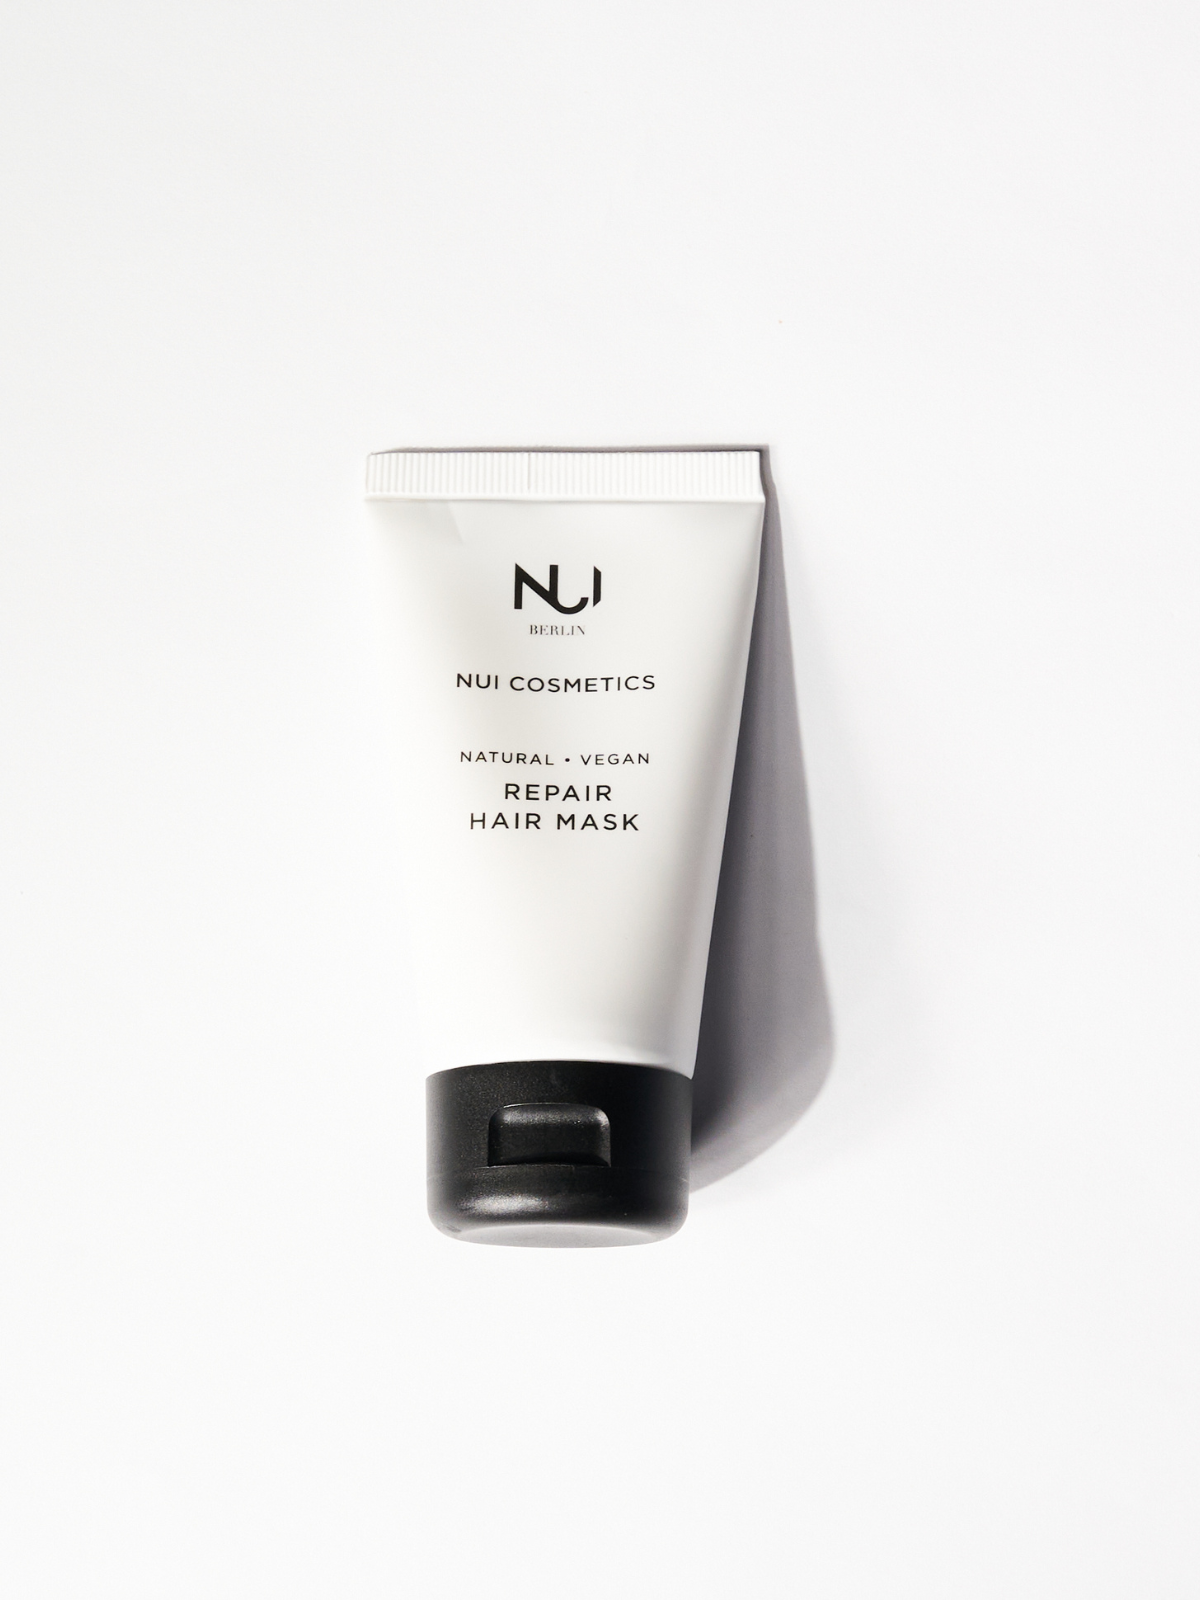 NUICosmetics_HairMask_Product_1.png